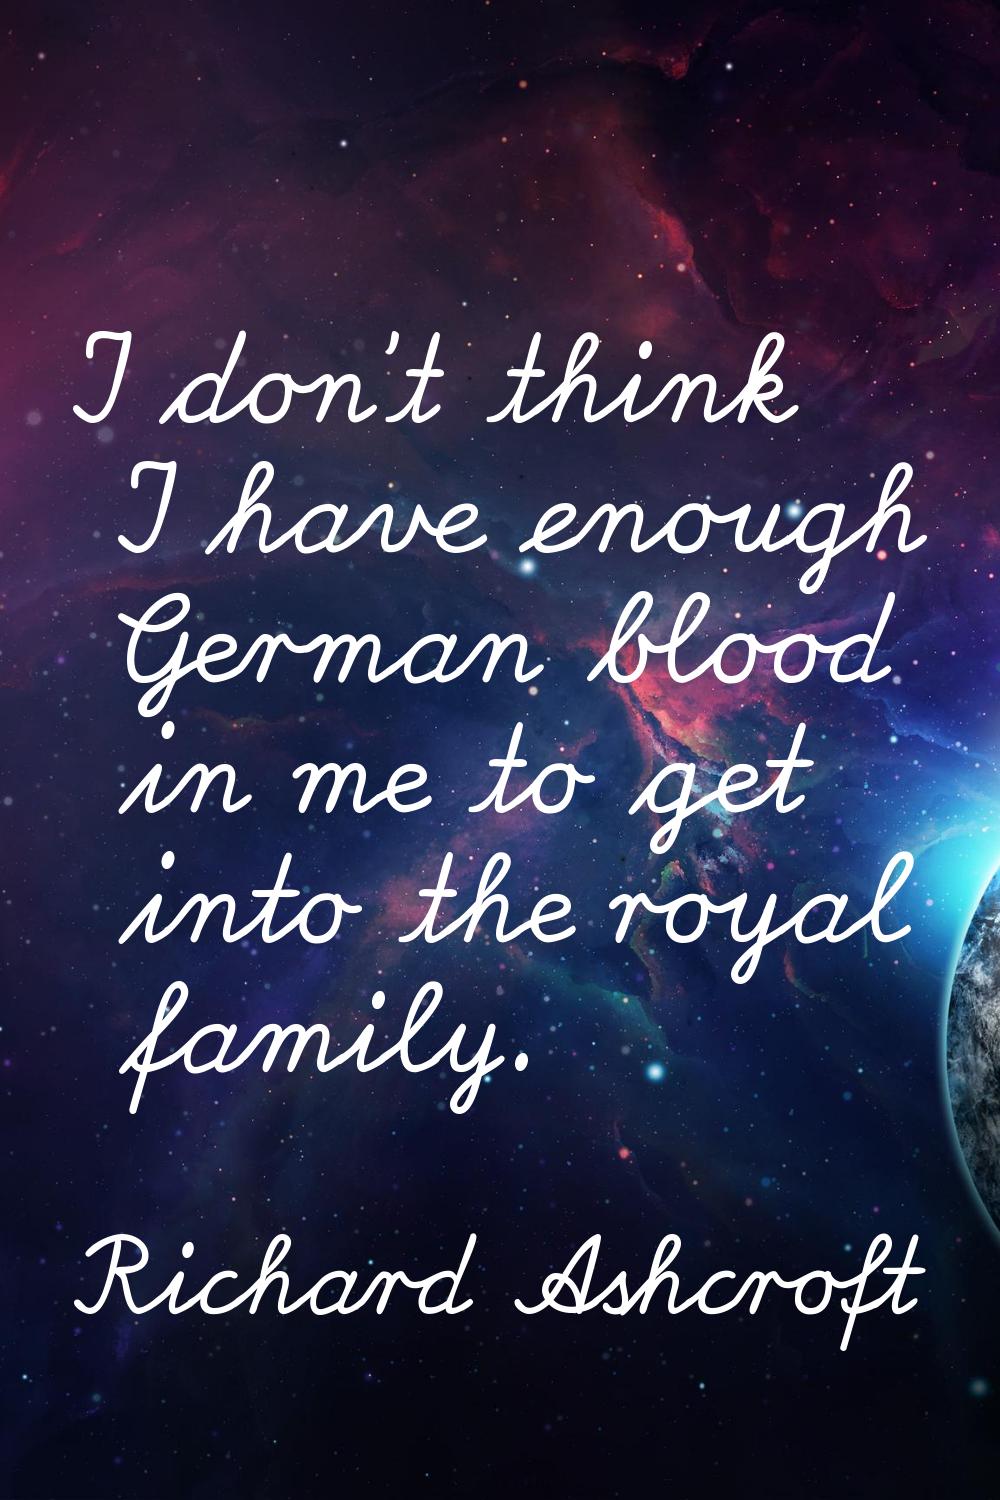 I don't think I have enough German blood in me to get into the royal family.